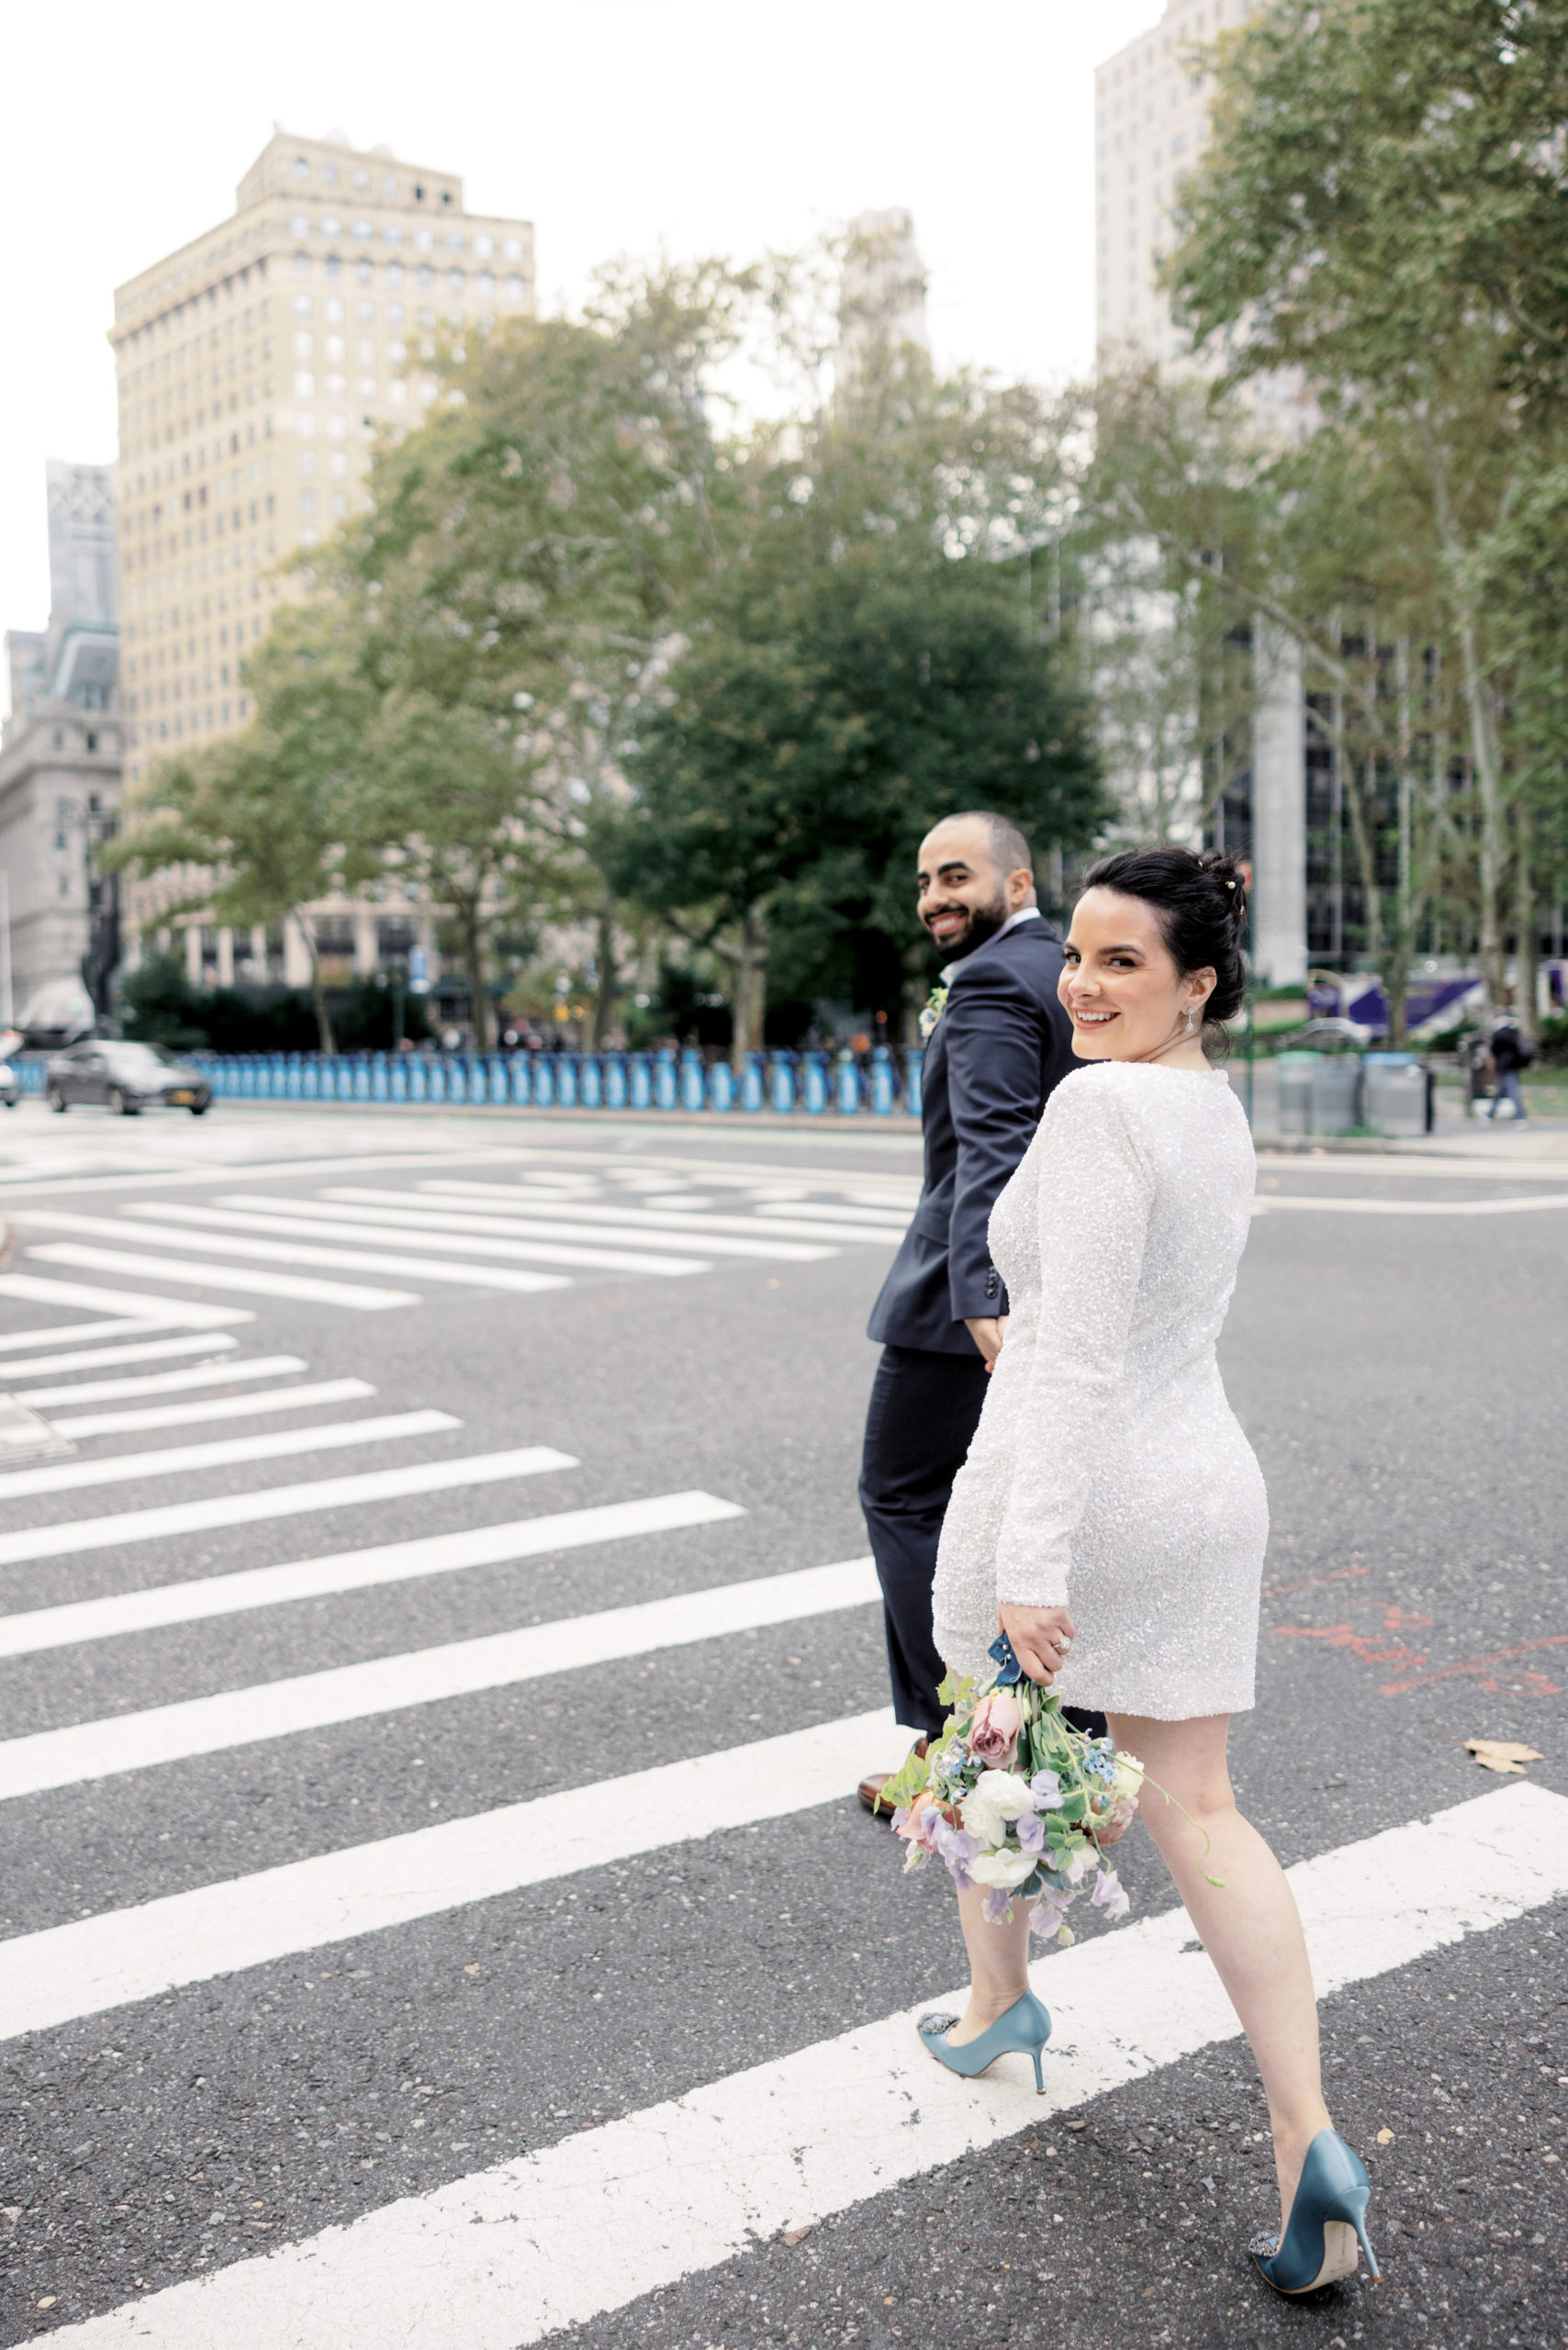 The bride and groom are happily crossing the street after their city hall elopement. 